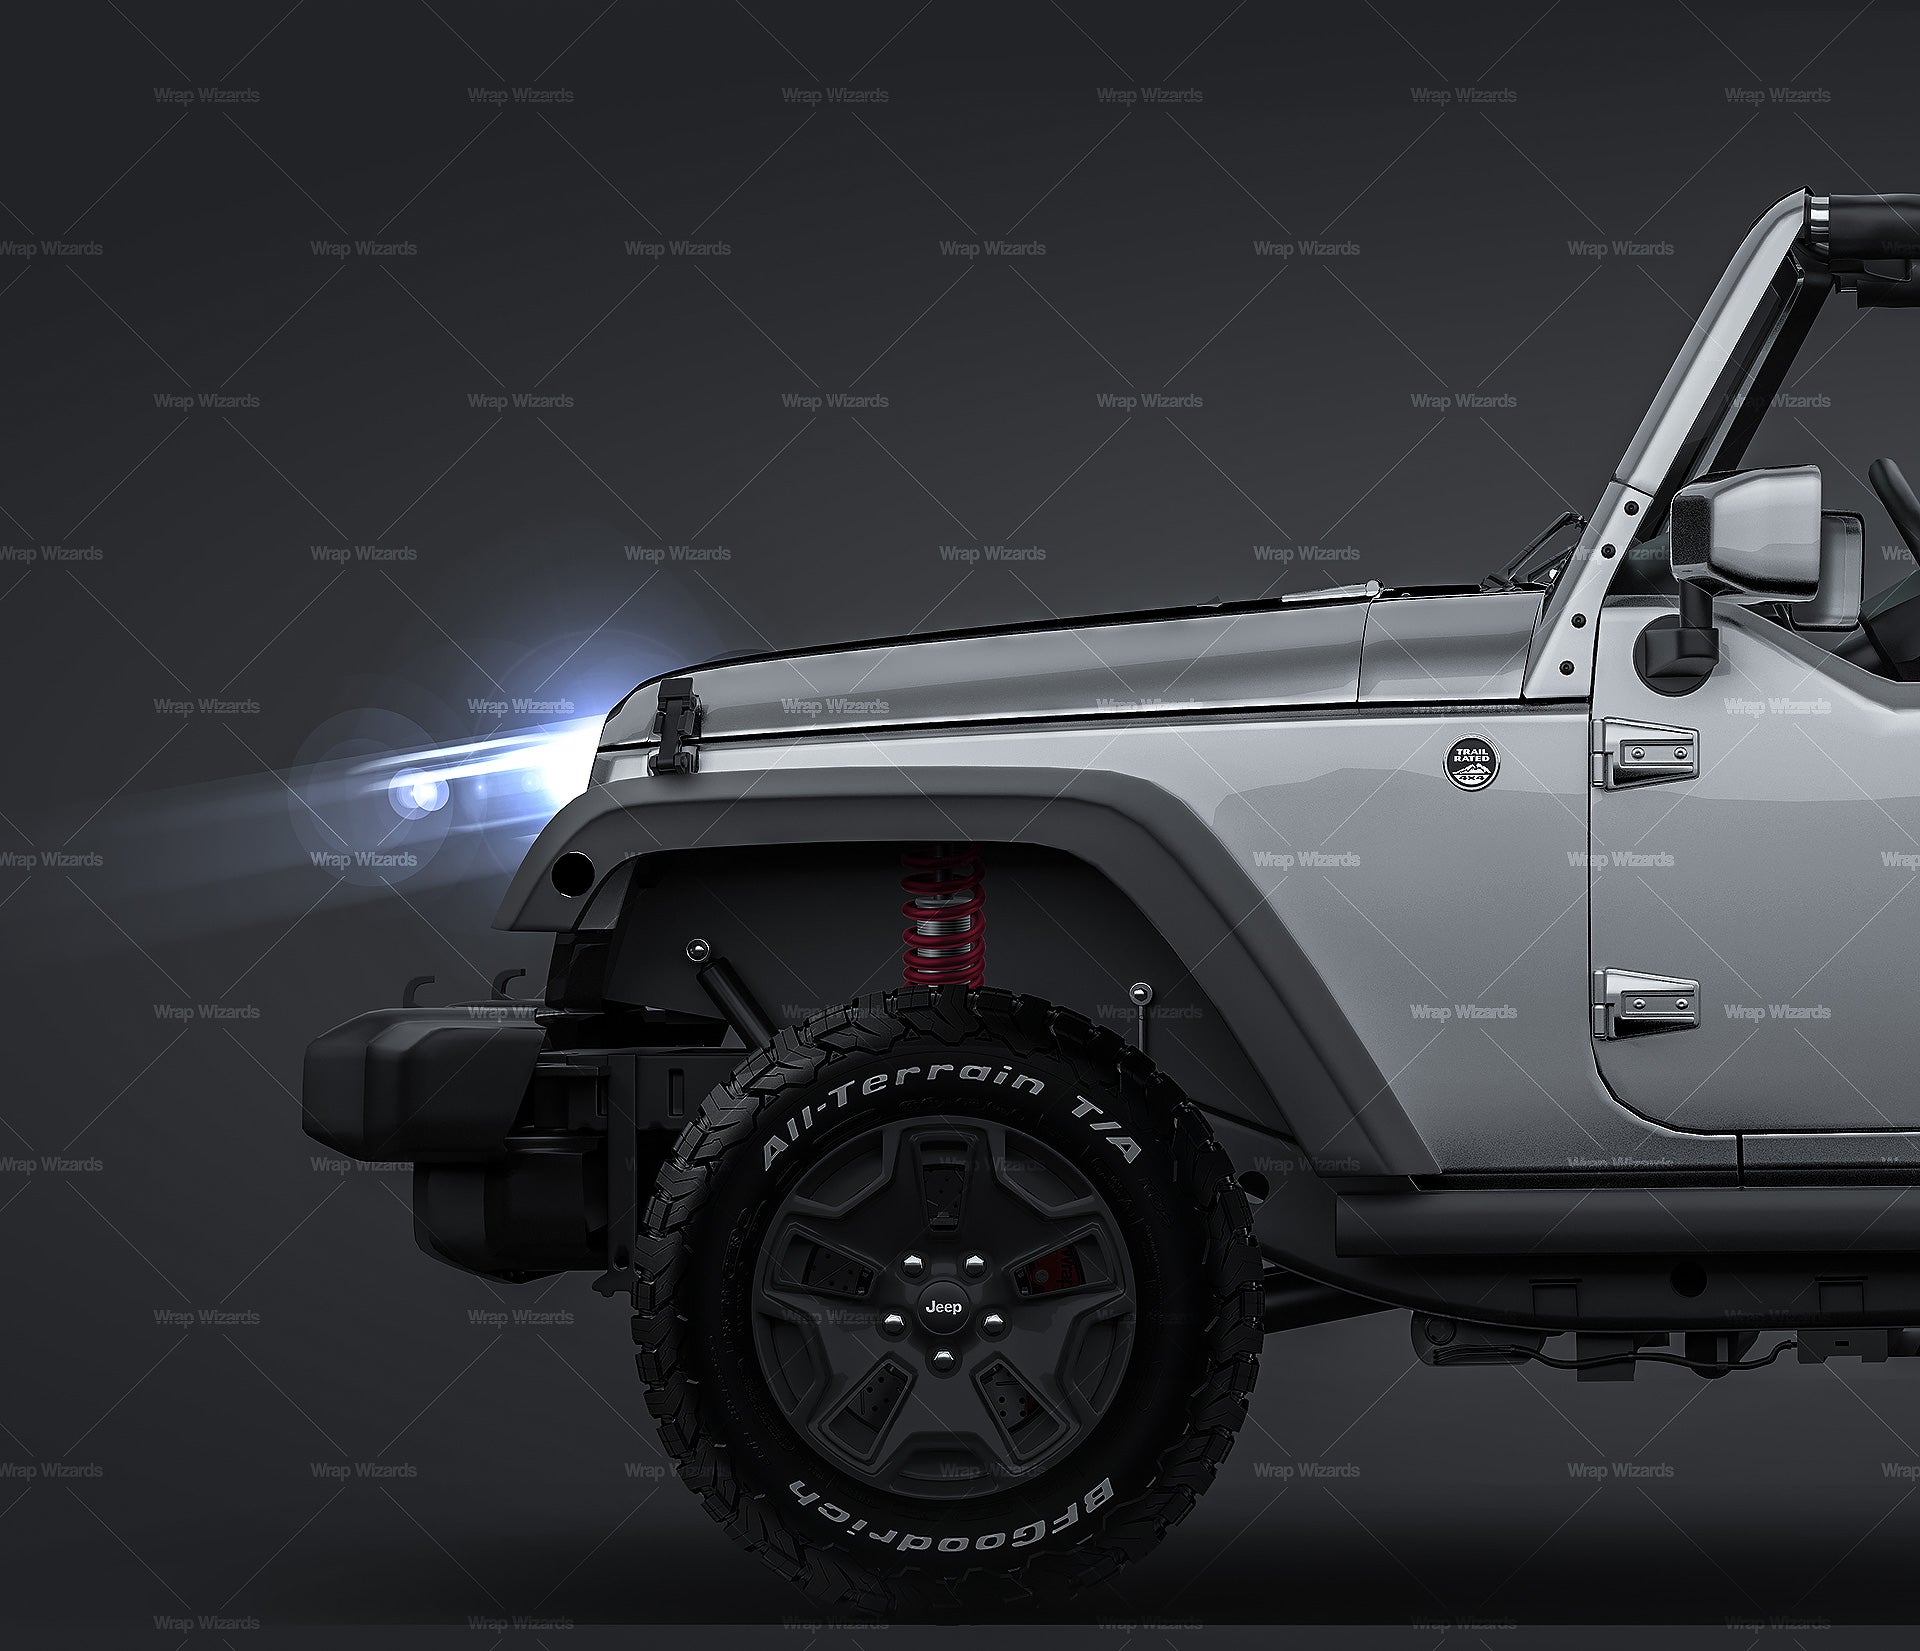 Jeep Wrangler Unlimited Willys Wheeler JK glossy finish - all sides Car Mockup Template.psd